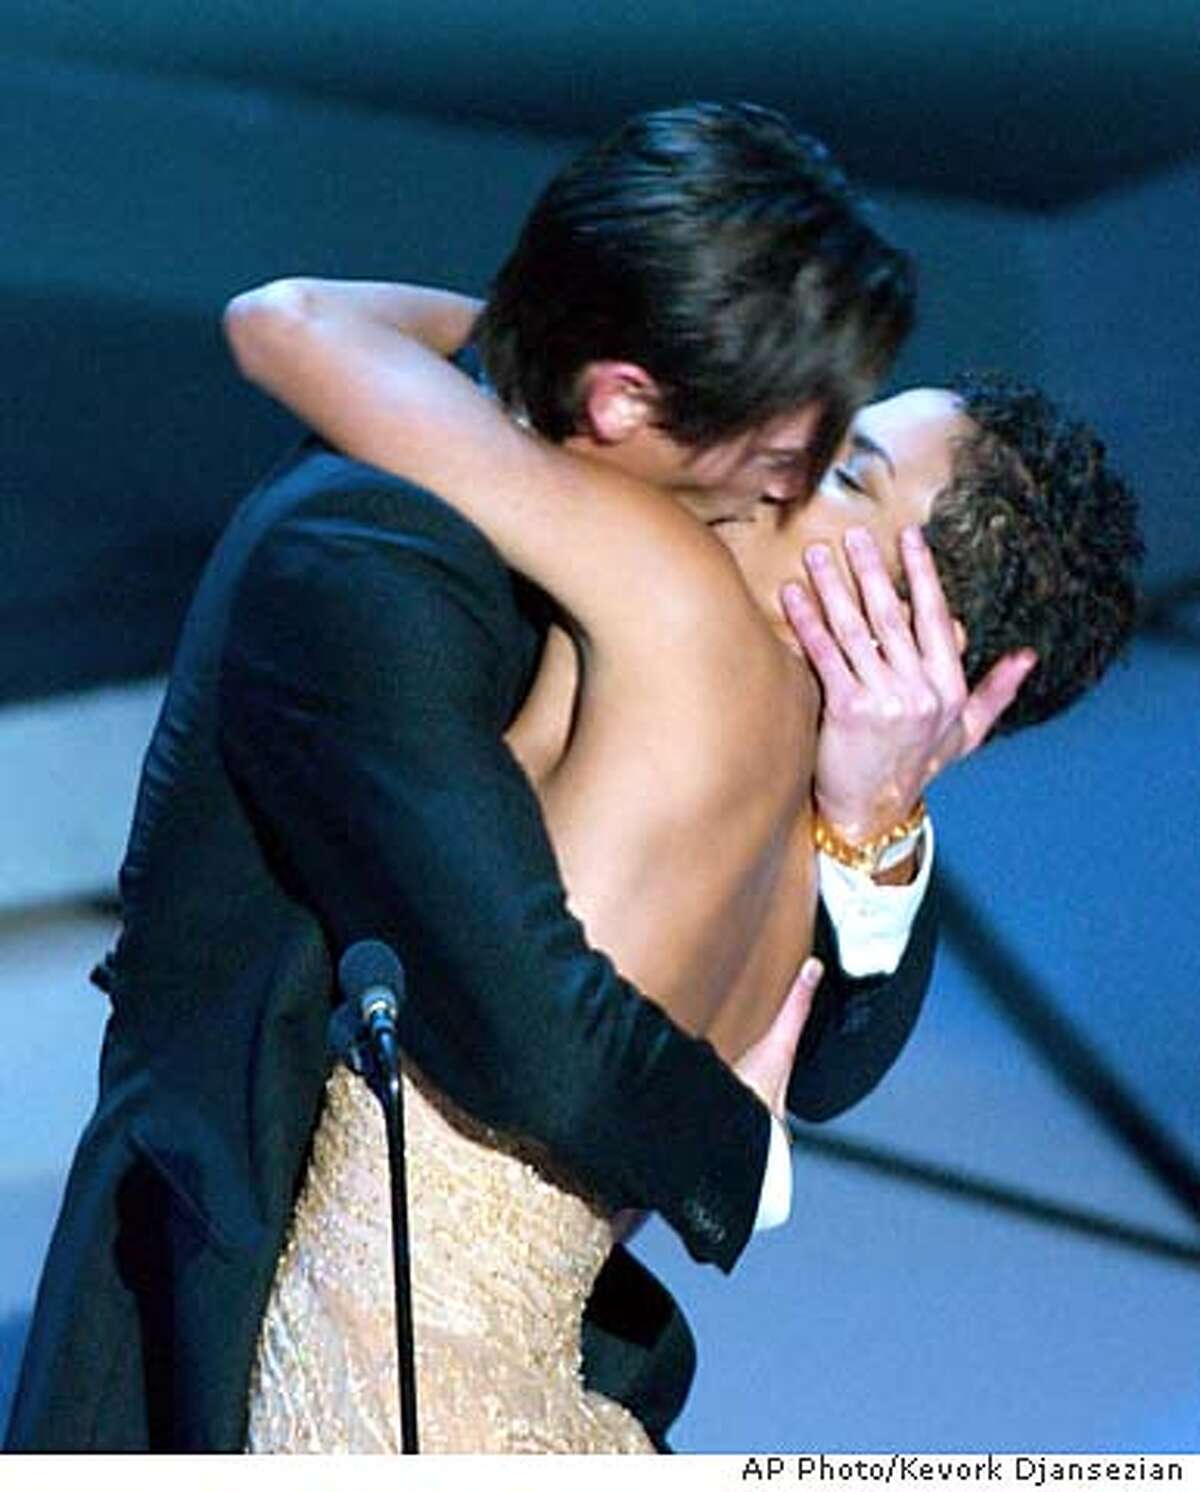 **EMBARGOED AT THE REQUEST OF THE MOTION PICTURE ACADEMY FOR USE UPON CONCLUSION OF ACADEMY AWARDS TELECAST** Actor Adrien Brody suprises presenter Halle Berry with a kiss after he won the Oscar for best actor for his work in The Pianist at the 75th annual Academy Awards Sunday, March 23, 2003, in Los Angeles. (AP Photo/Kevork Djansezian)